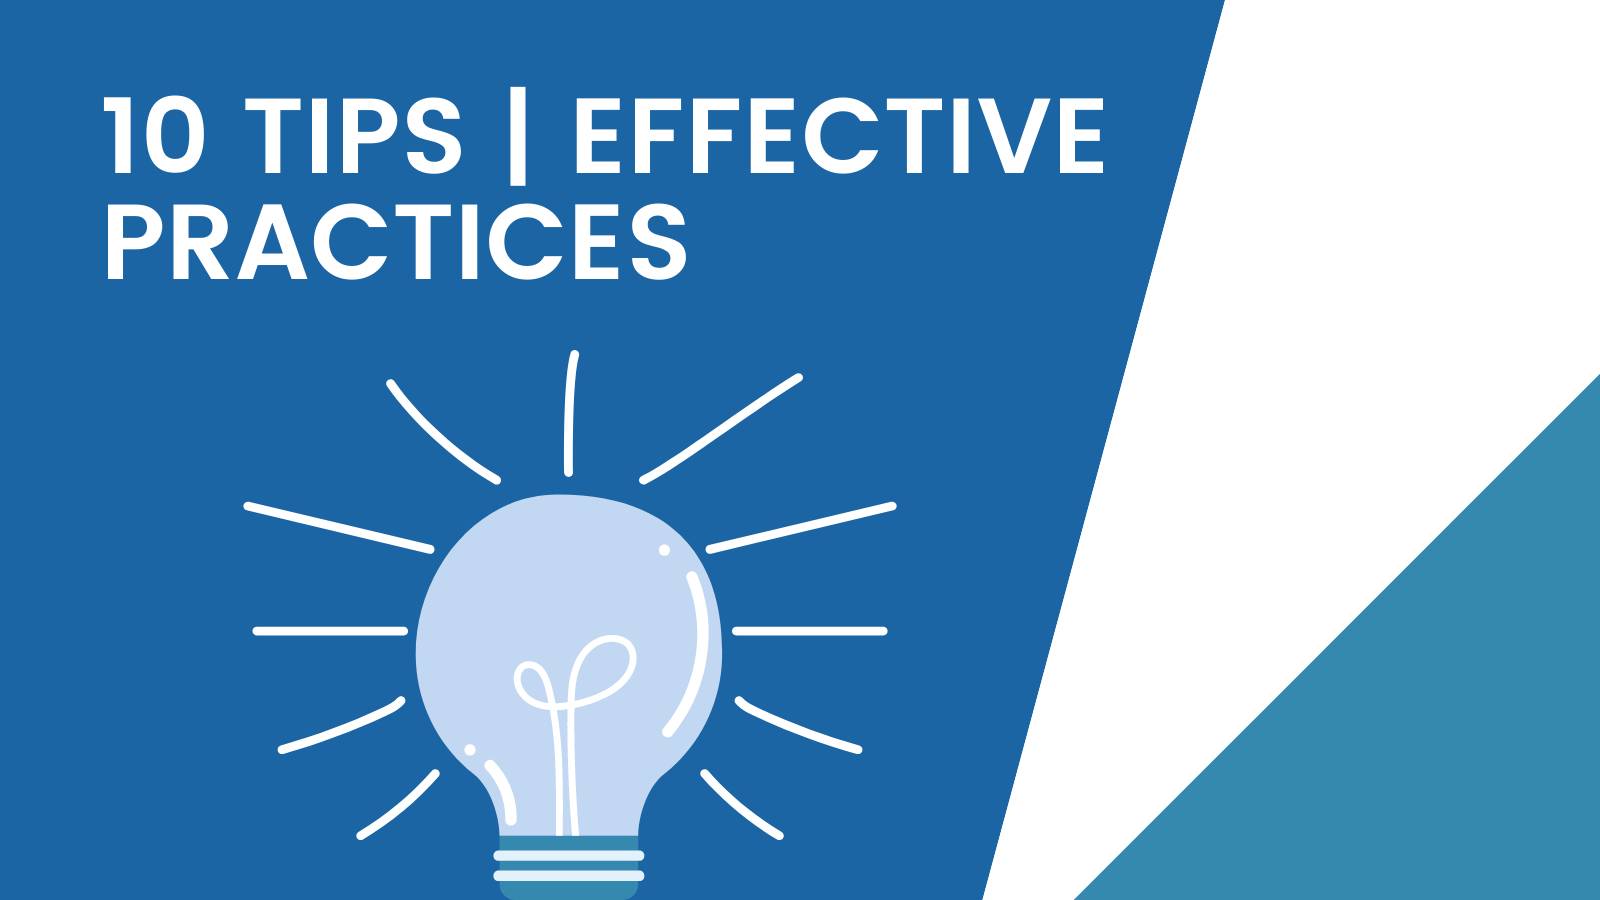 10 Tips for Effective Practices in Digital Teaching